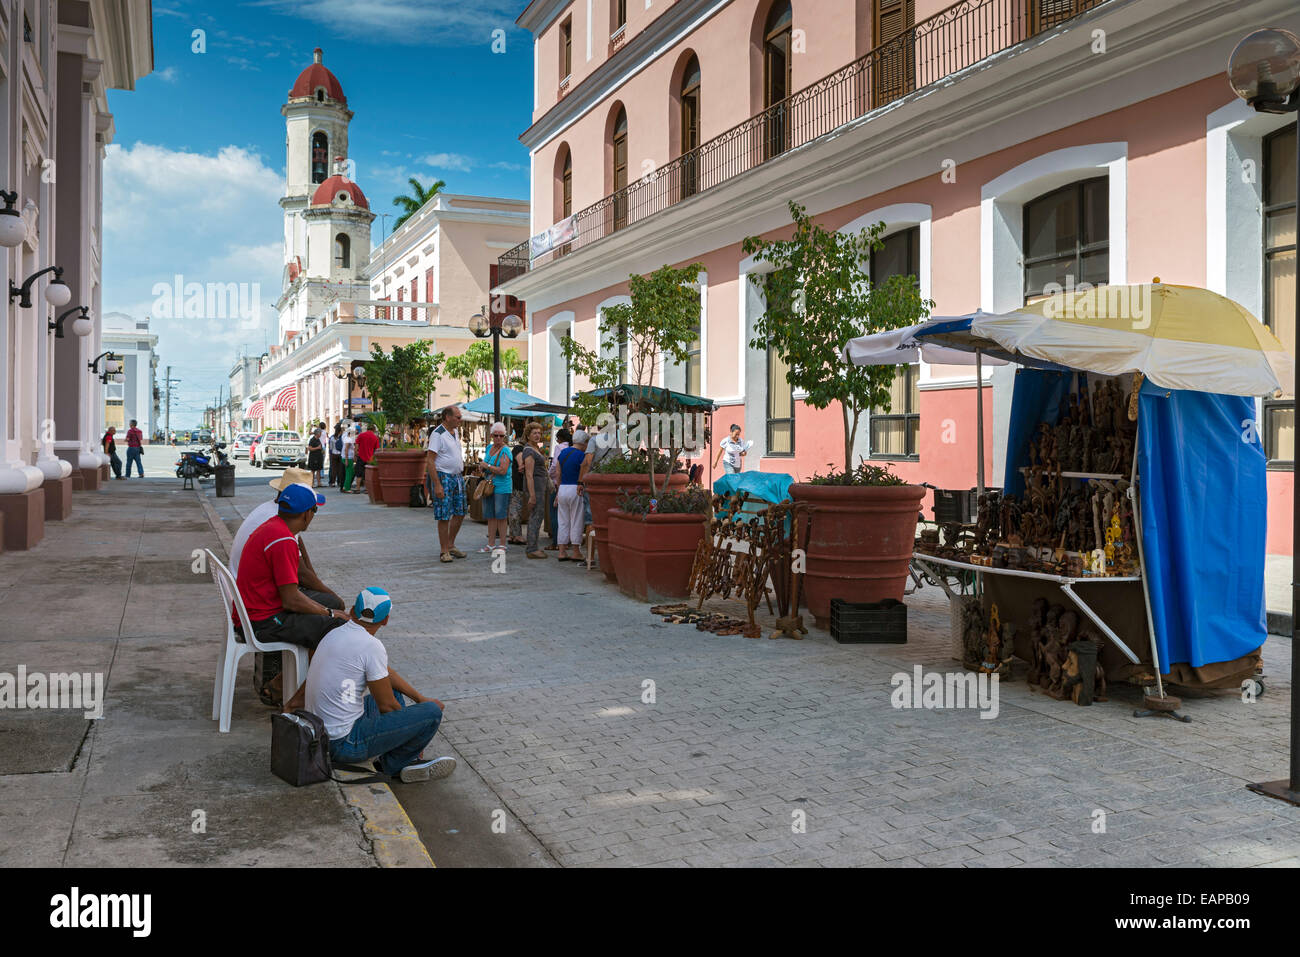 CIENFUEGOS, CUBA - MAY 7, 2014: Street market selling crafts and souvenirs on a street in Cienfuegos, Cuba Stock Photo